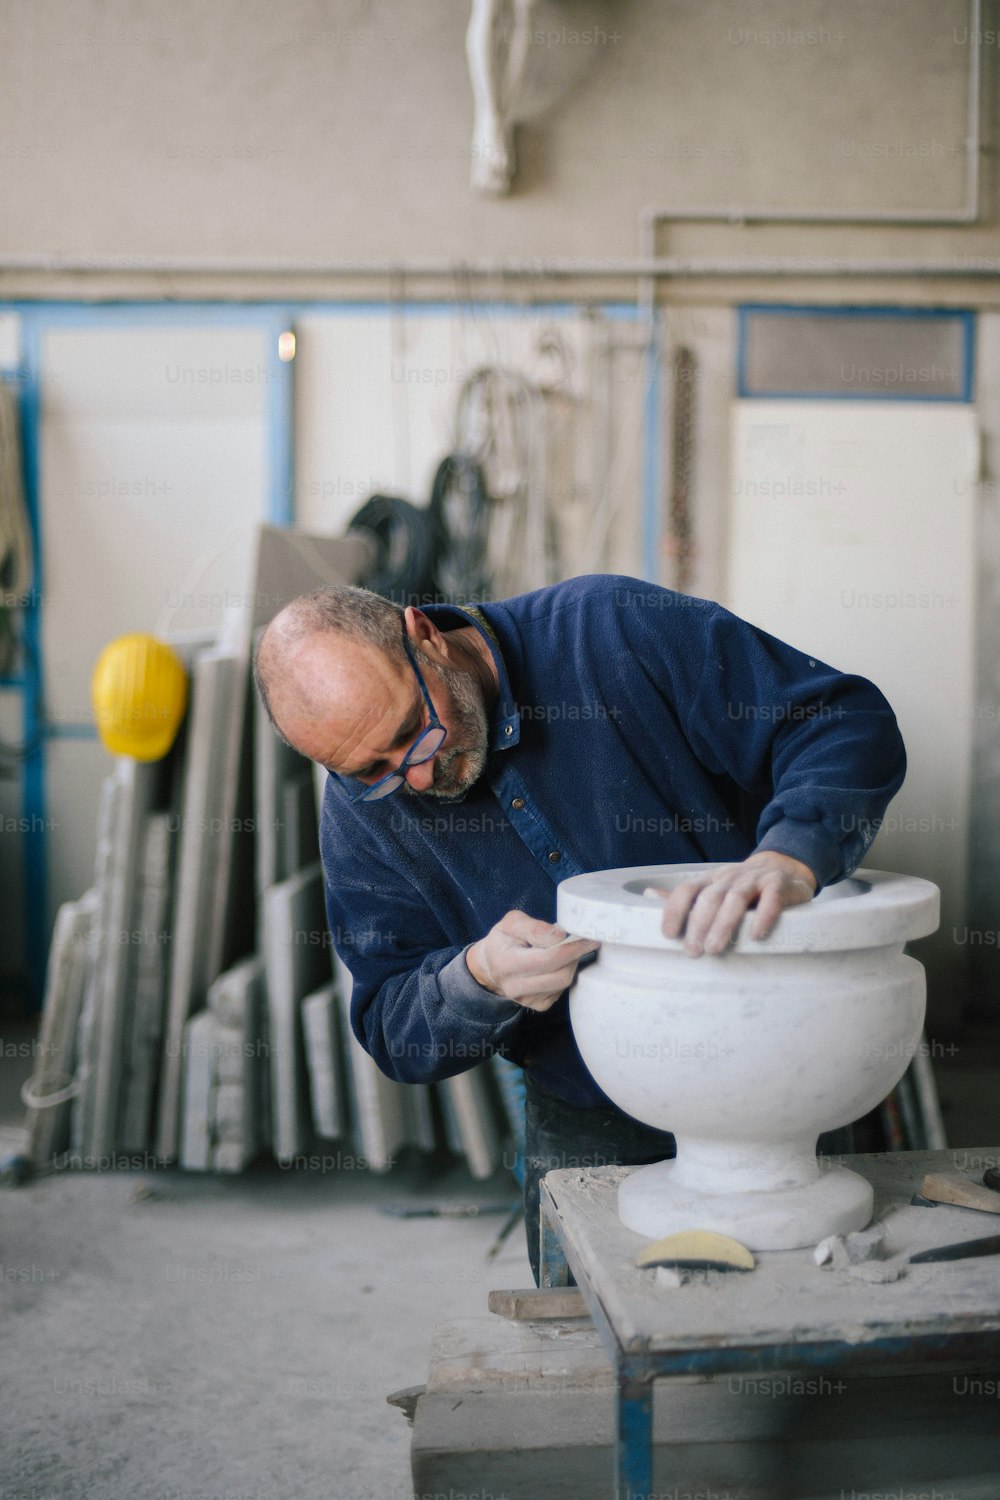 a man is working on a white vase